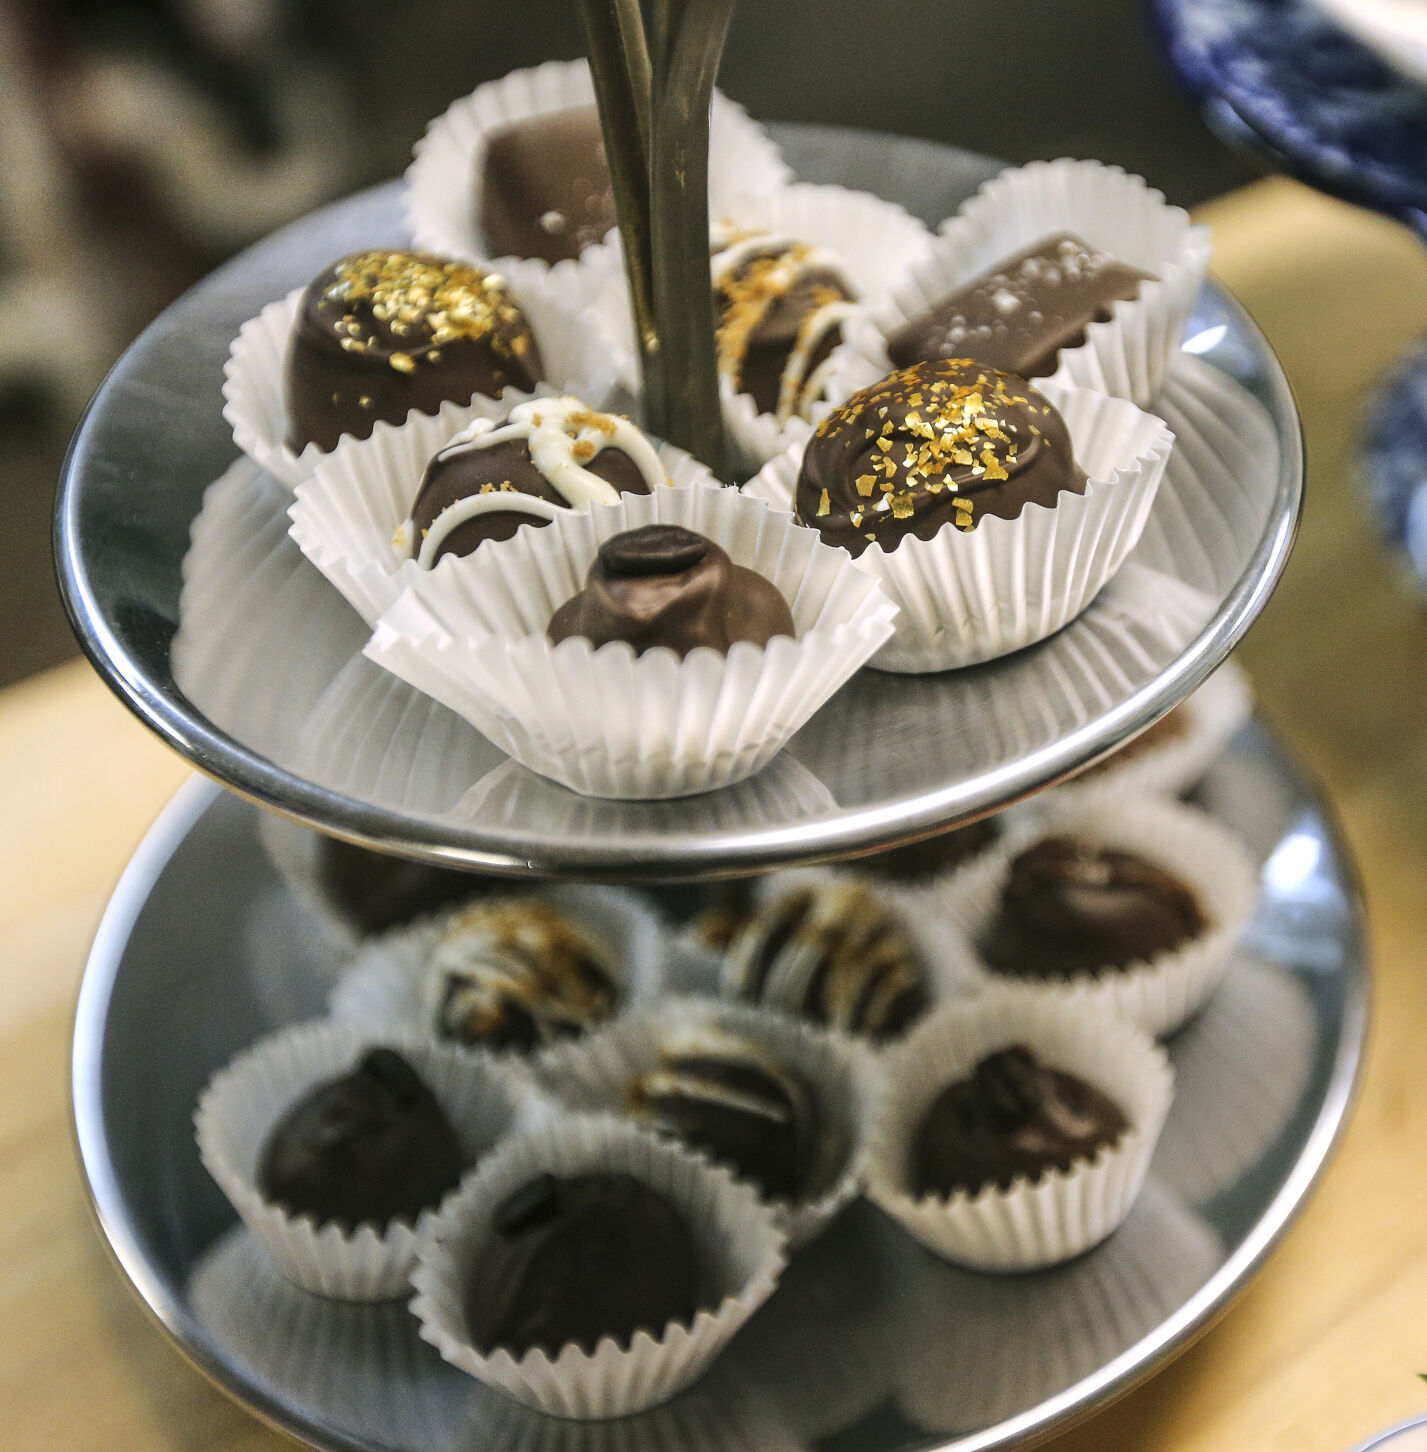 Chocolate truffles that will be part of the array of items available at the Field of Chocolate Dreams chocolate shop to open in February.    PHOTO CREDIT: Dave Kettering